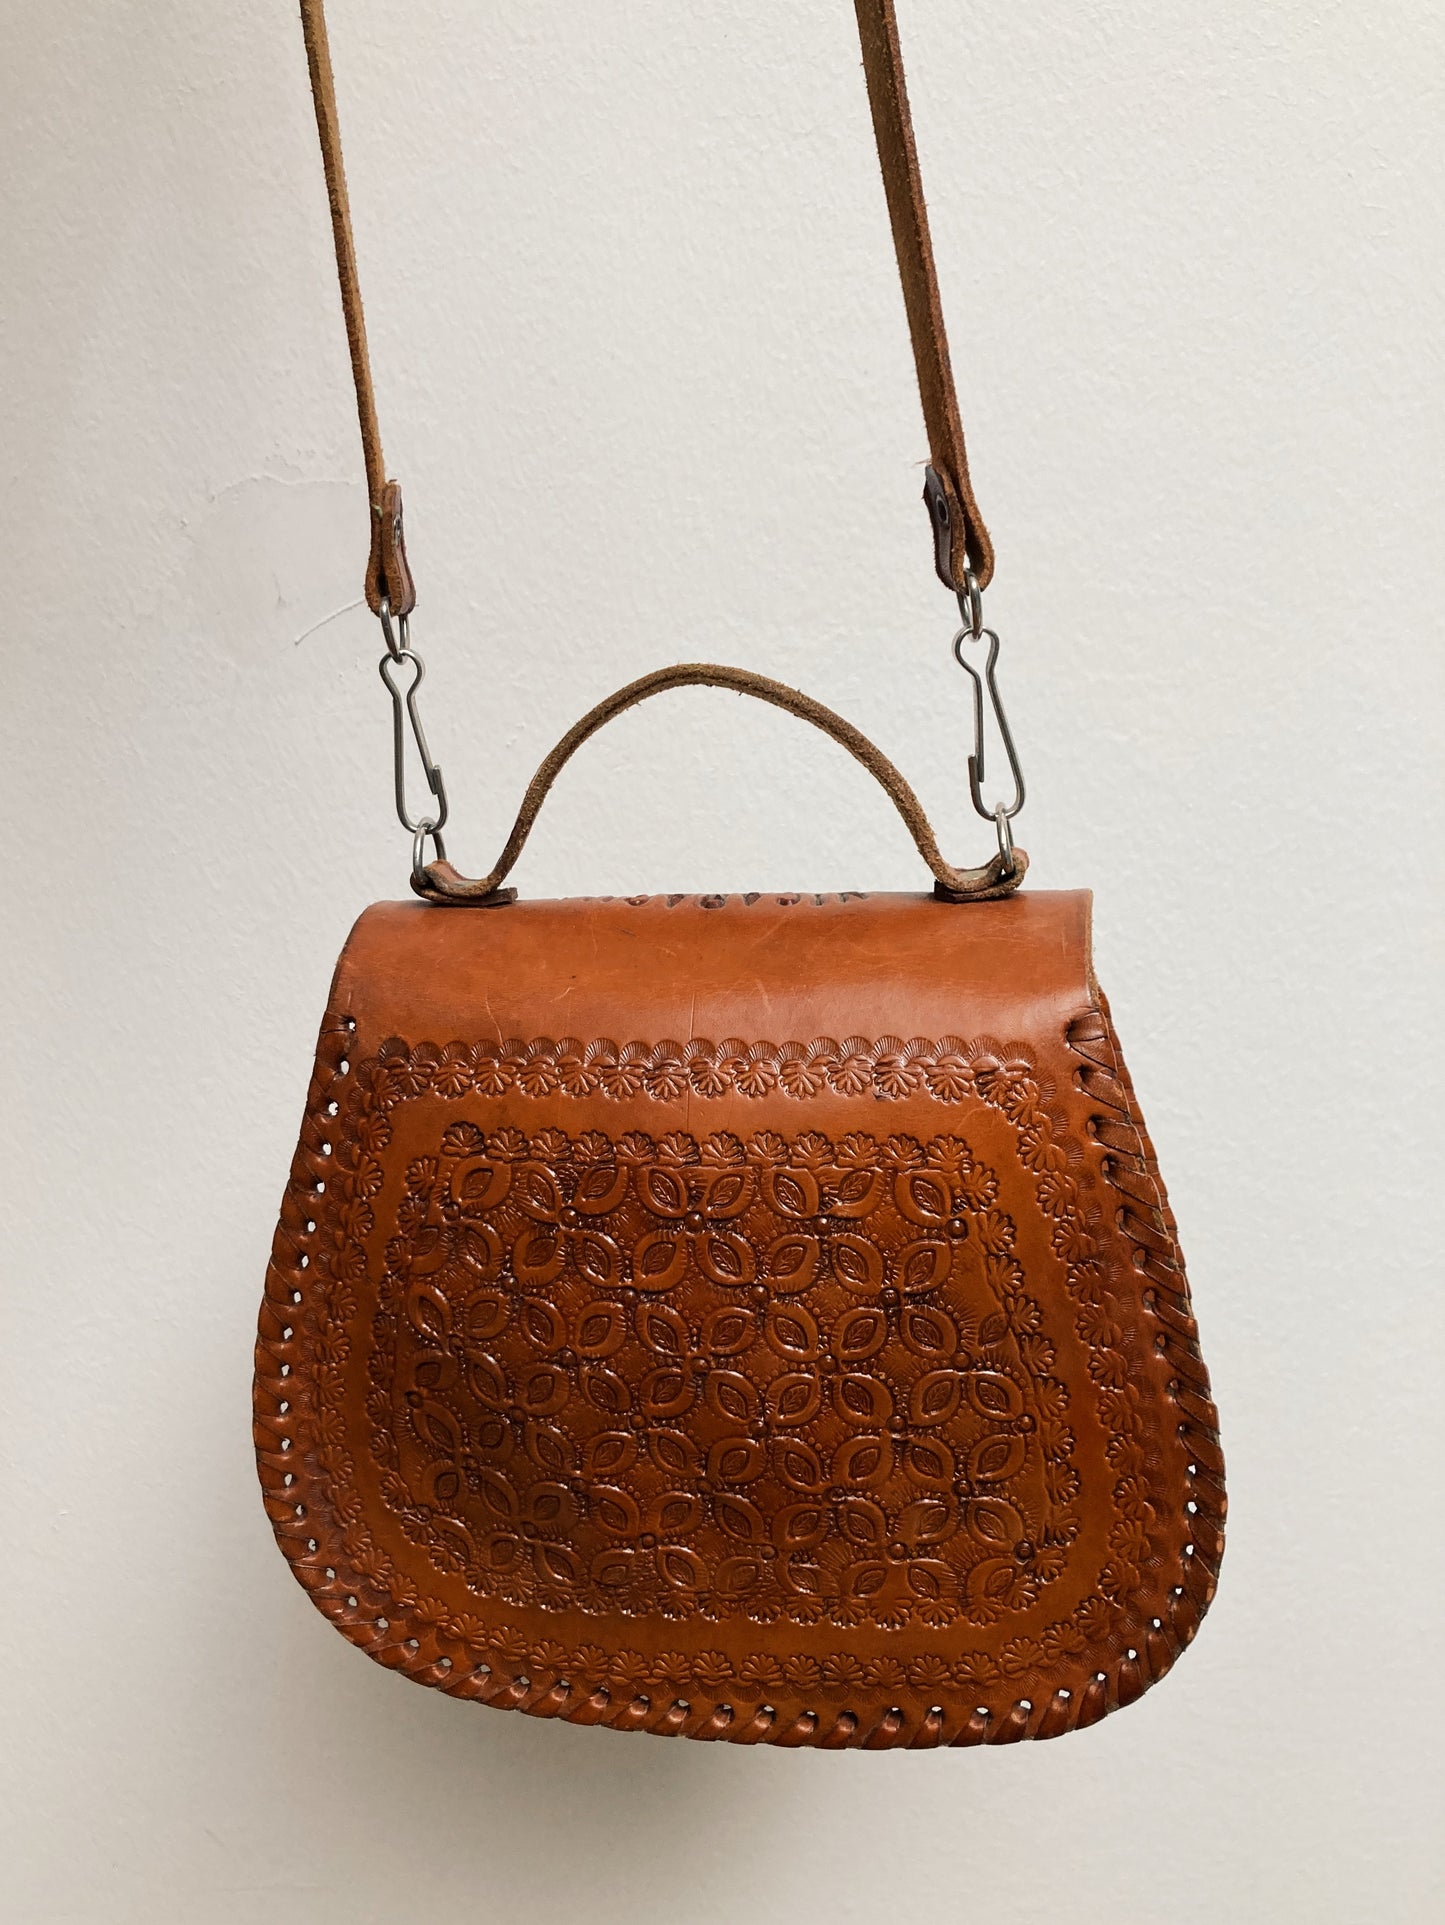 NEW IN! Leather bag